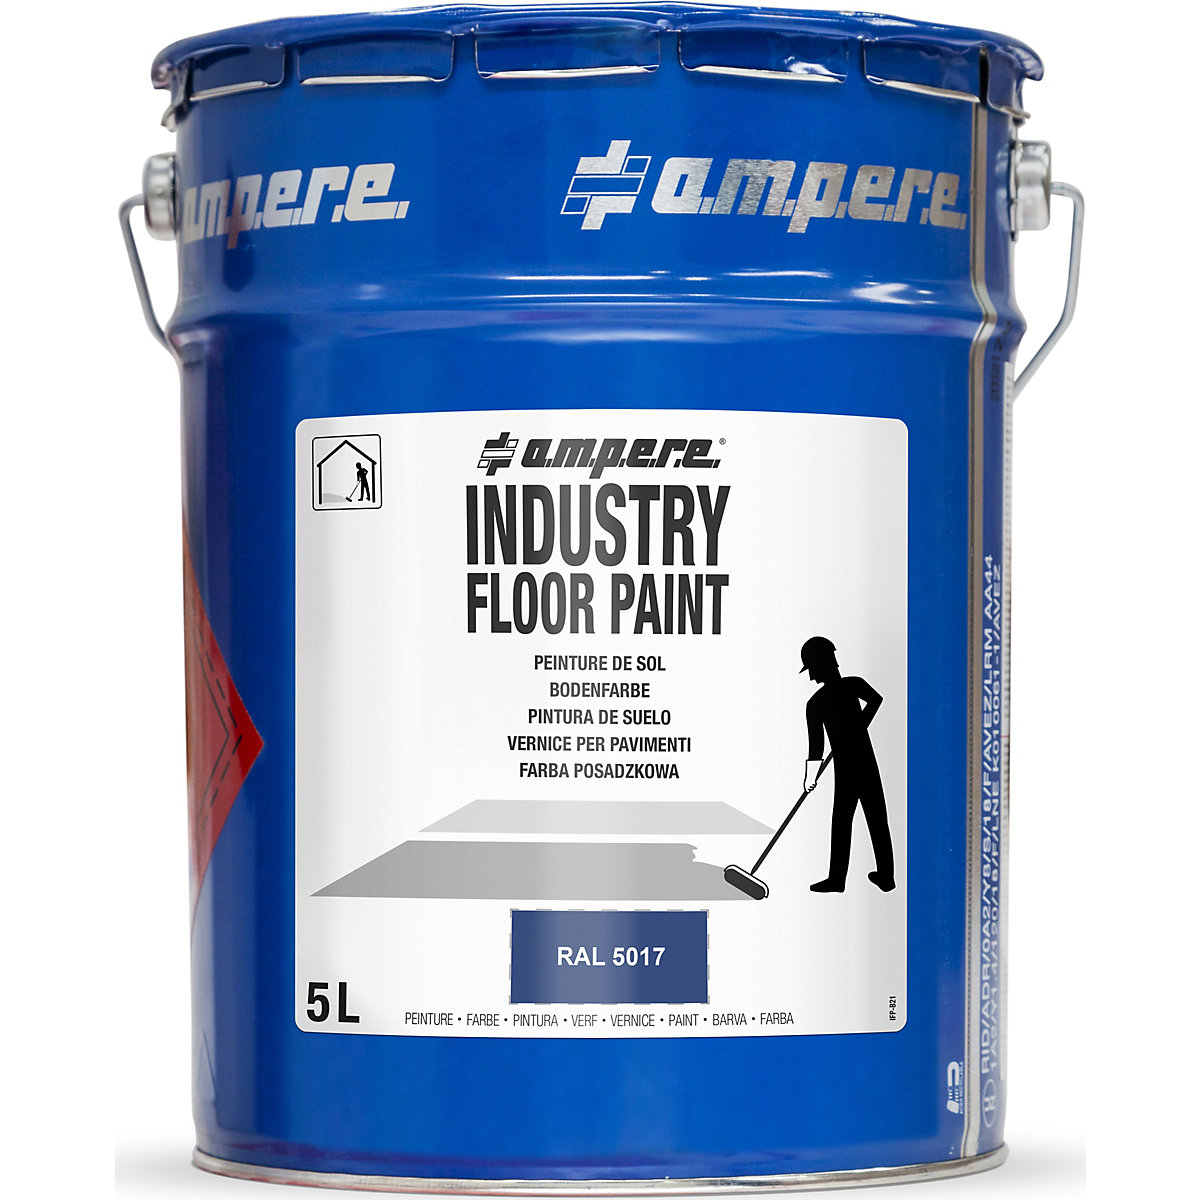 Industry Floor Paint® ground marking paint - Ampere